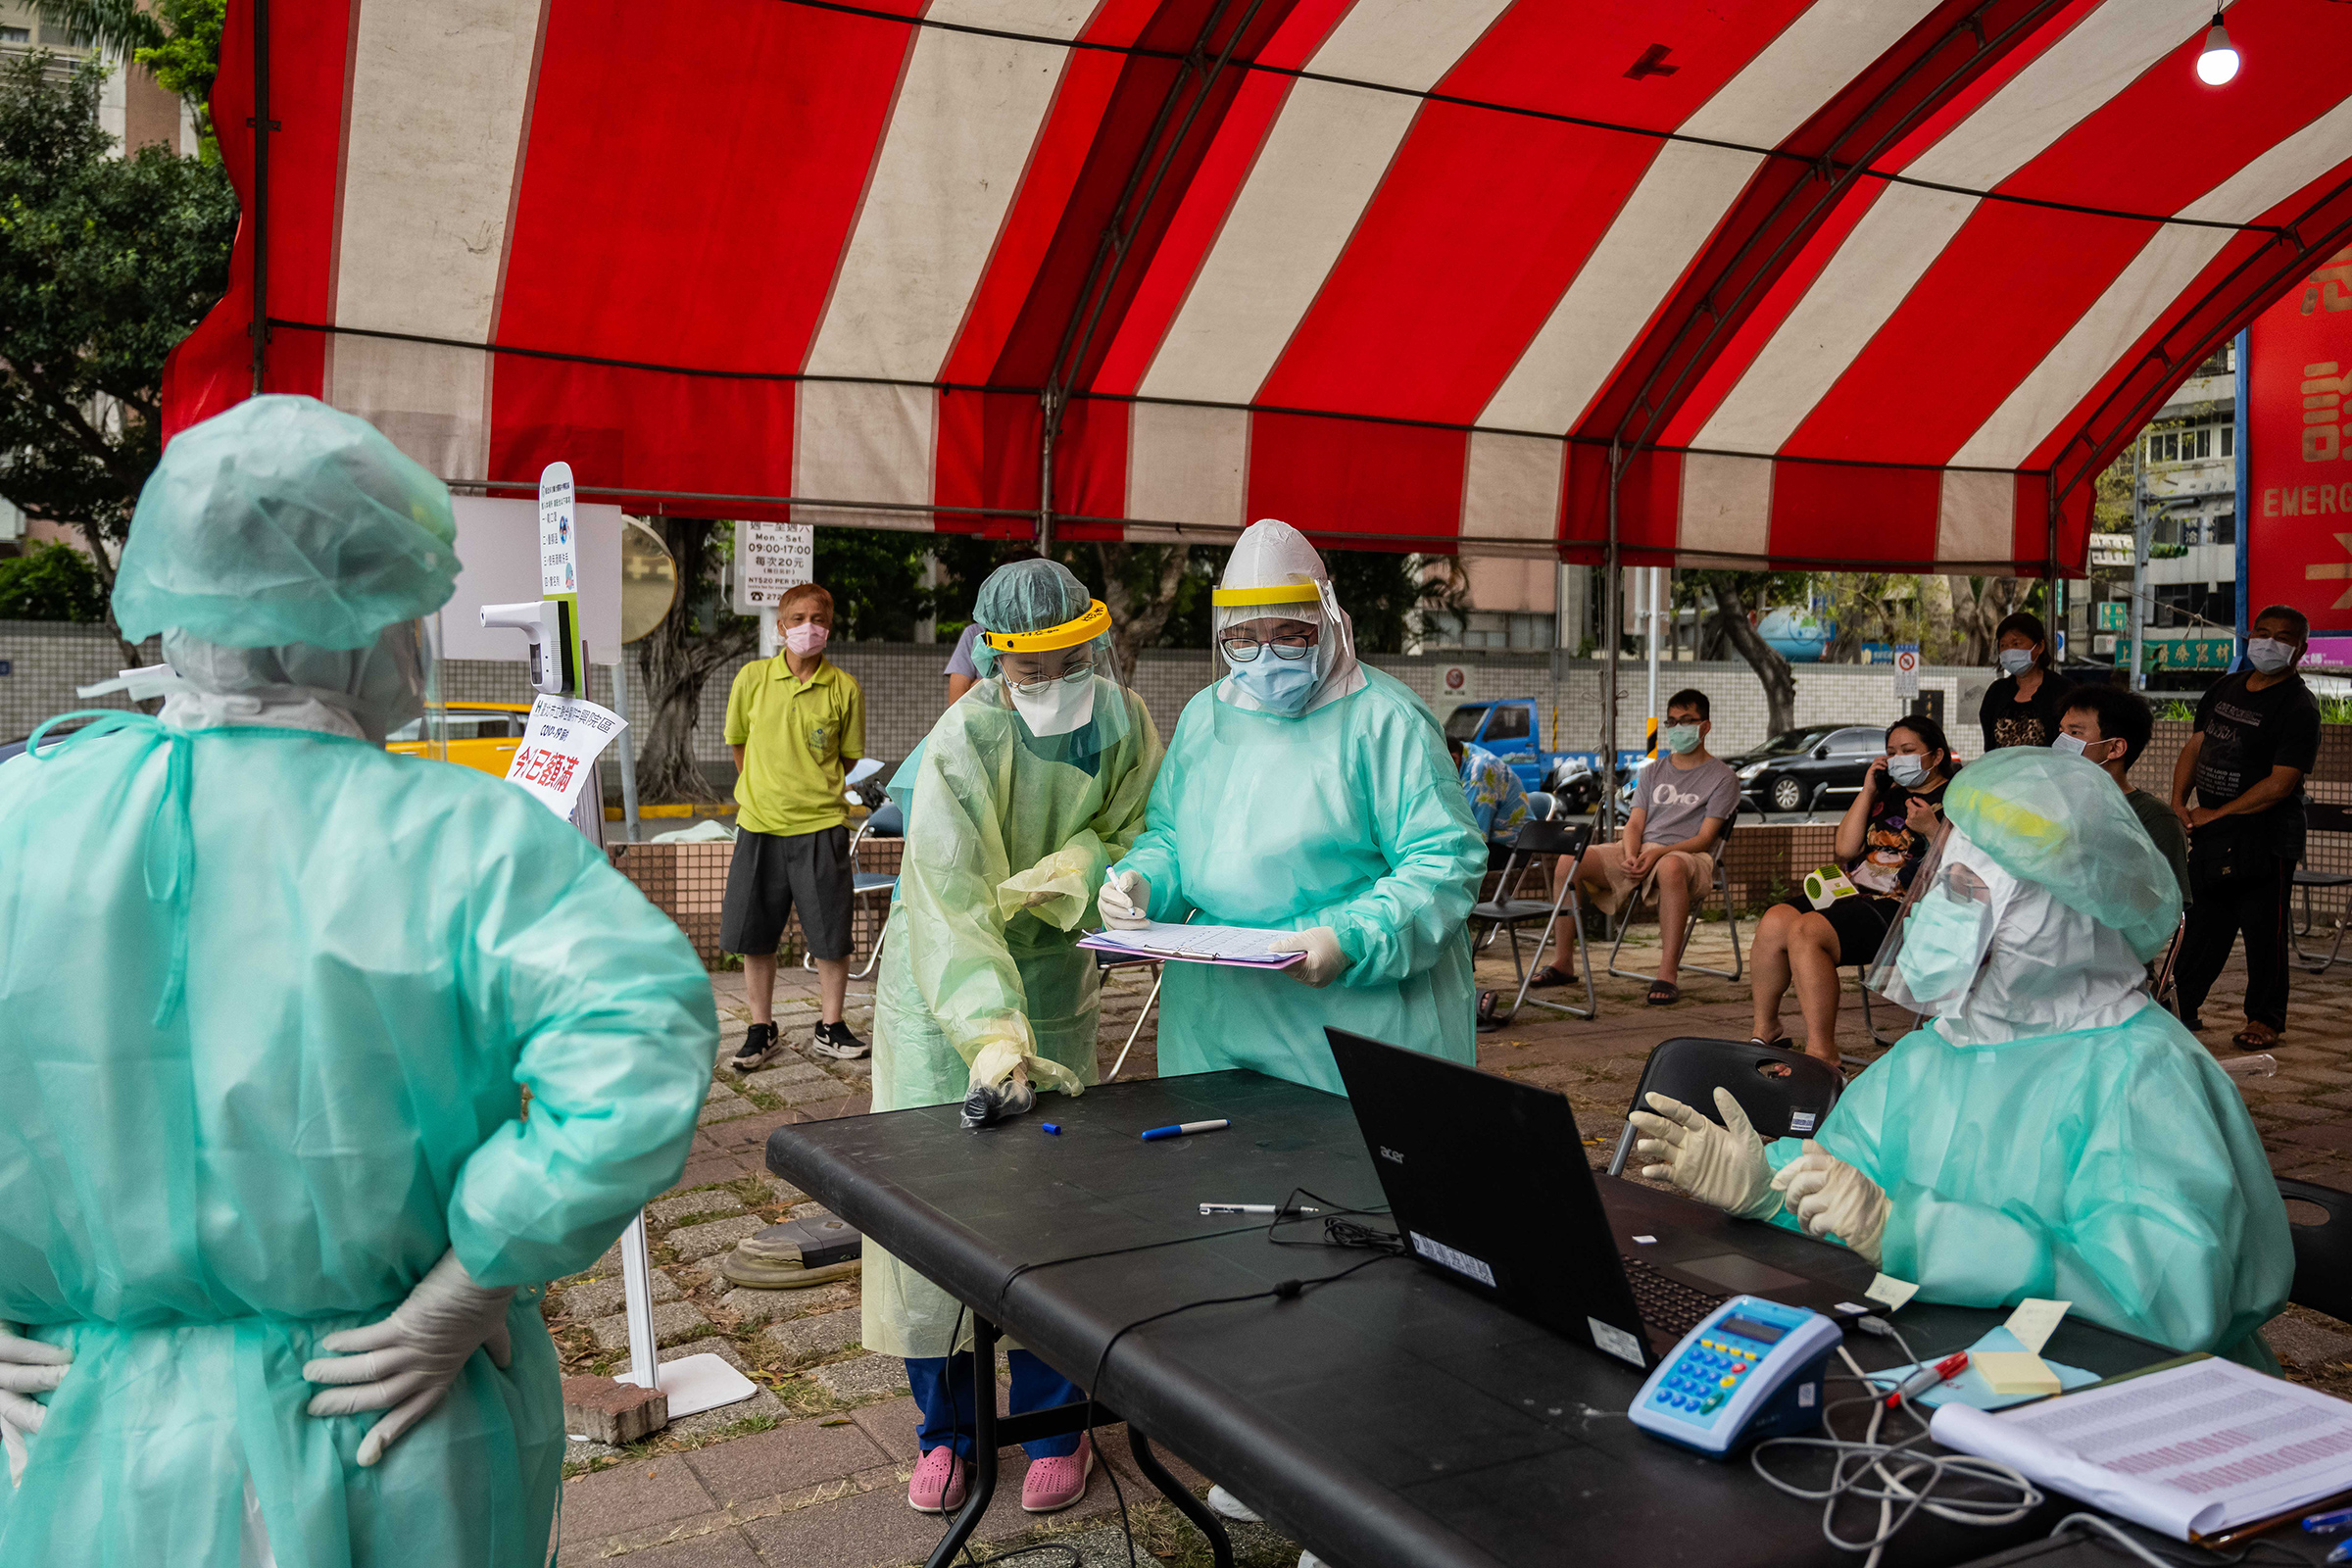 Health care workers at a temporary COVID-19 rapid testing site in Taipei on May 17, 2021. (Billy H.C. Kwok—Bloomberg/Getty Images)